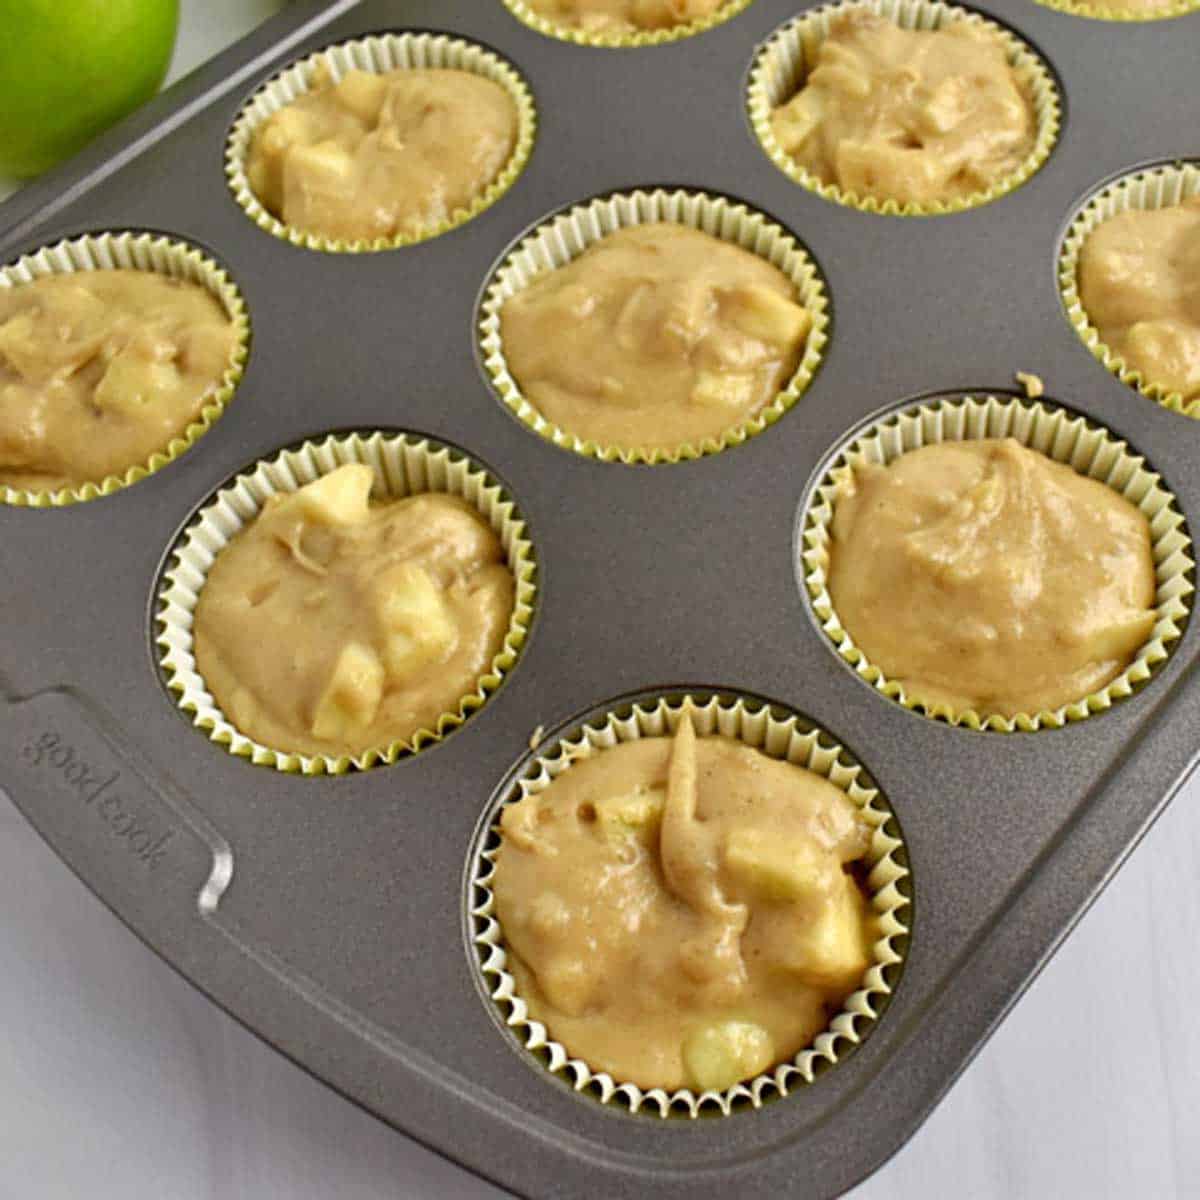 Batter for gluten free apple muffins in lined muffin pan.